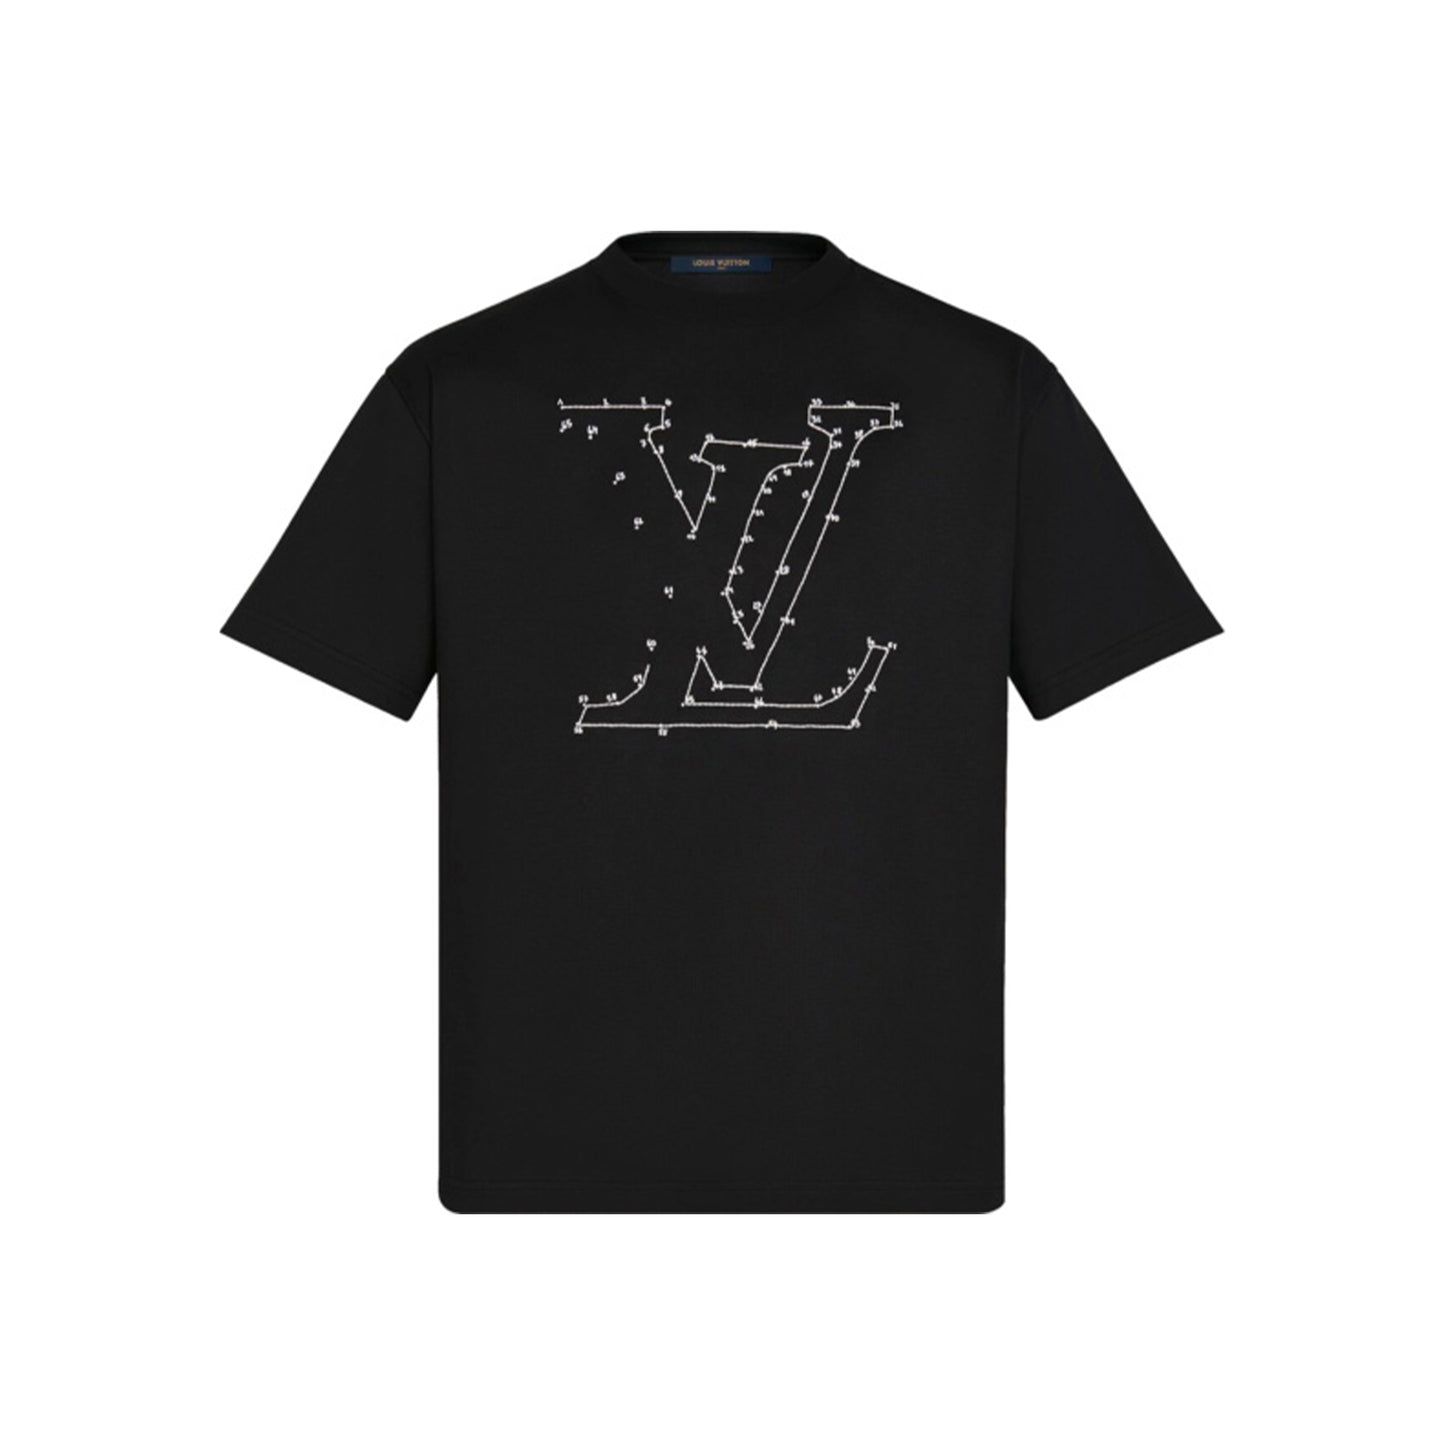 Louis Vuitton LV Stitch Print and Embroidered Tee Black